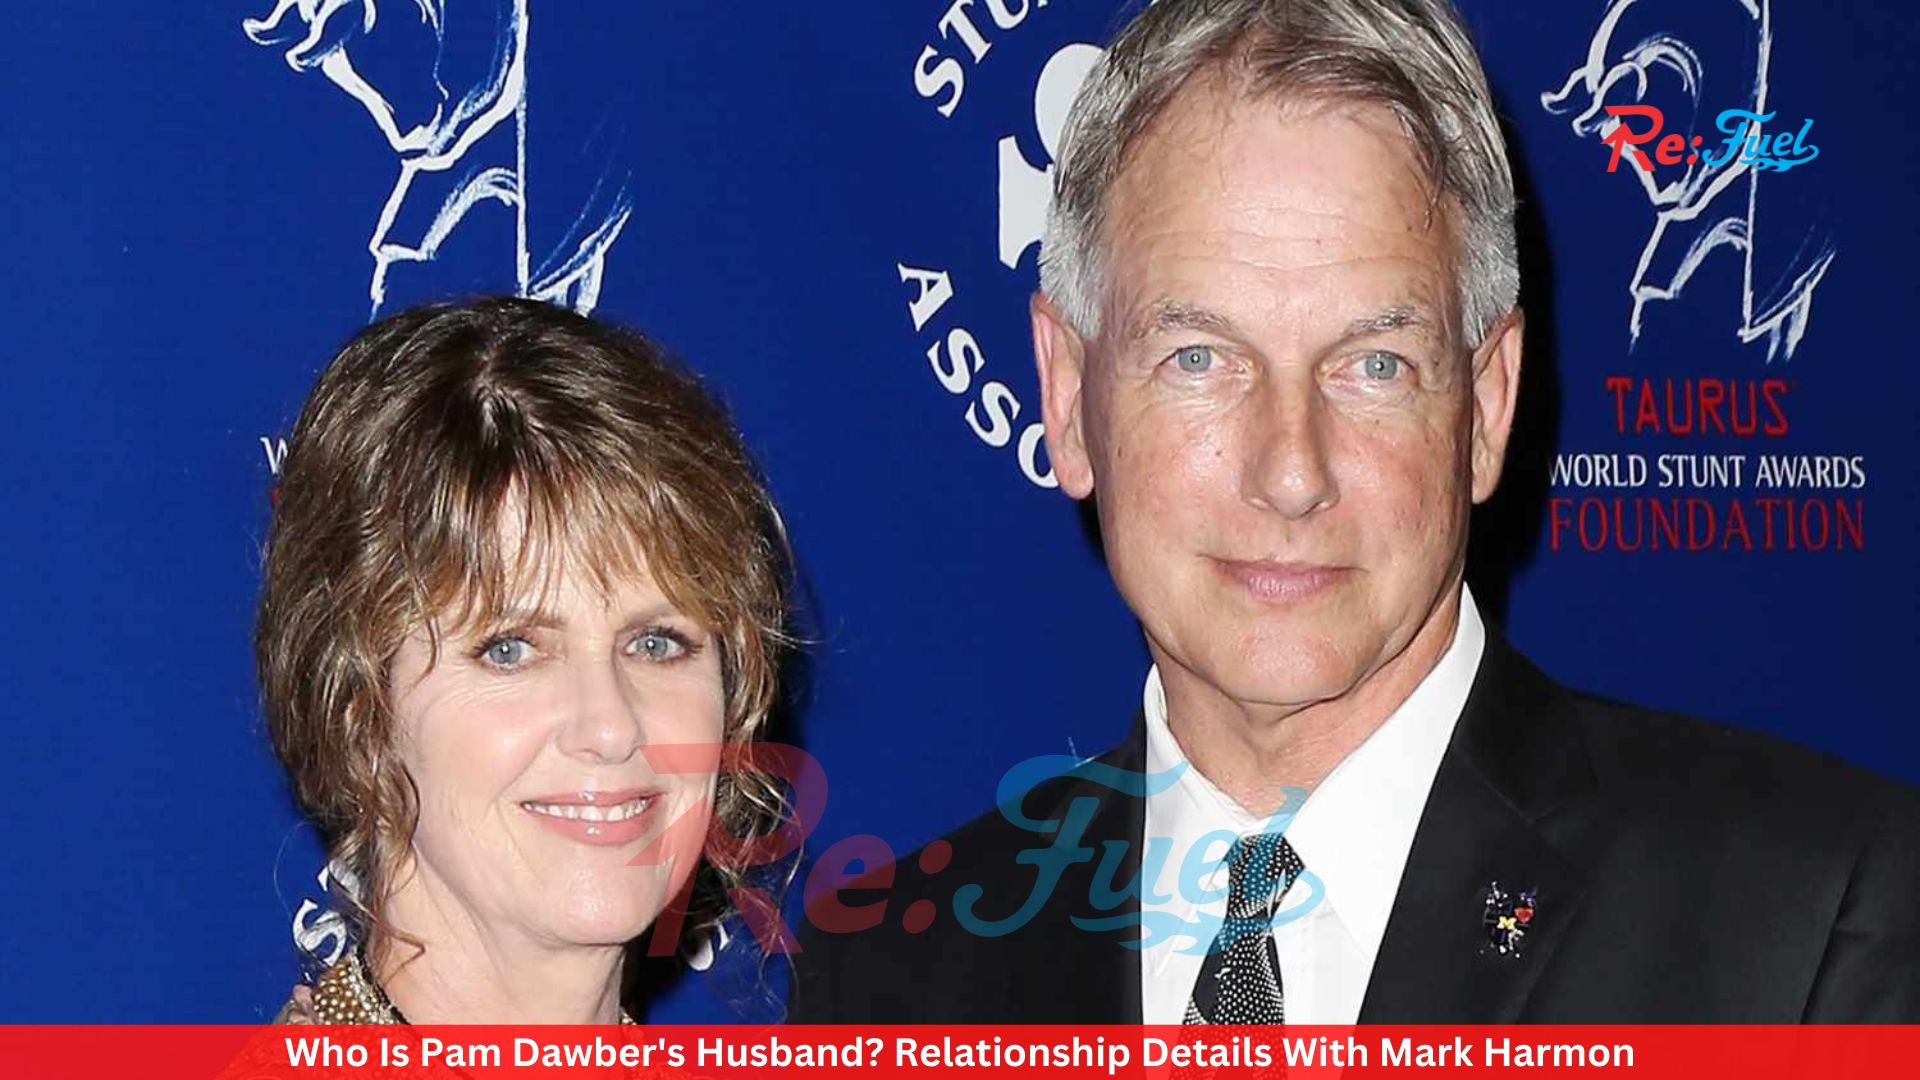 Who Is Pam Dawber's Husband? Relationship Details With Mark Harmon